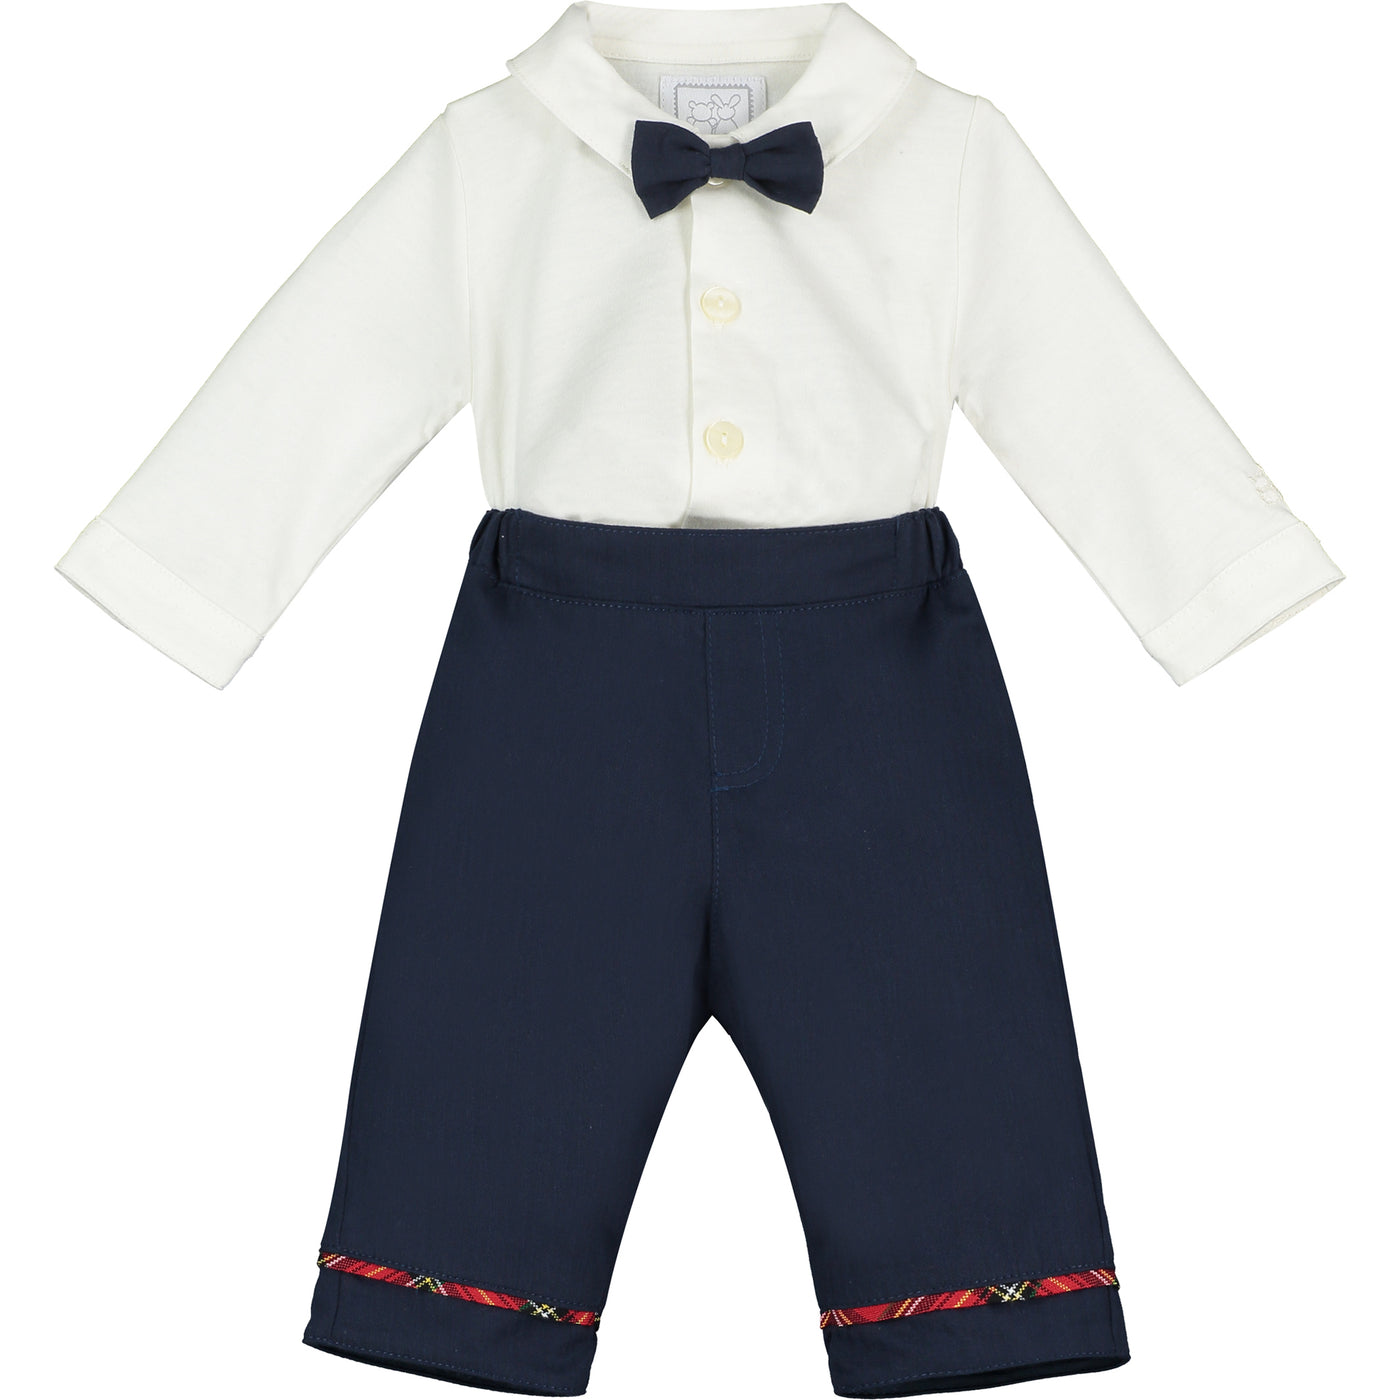 Campbell Navy Boys Outfit